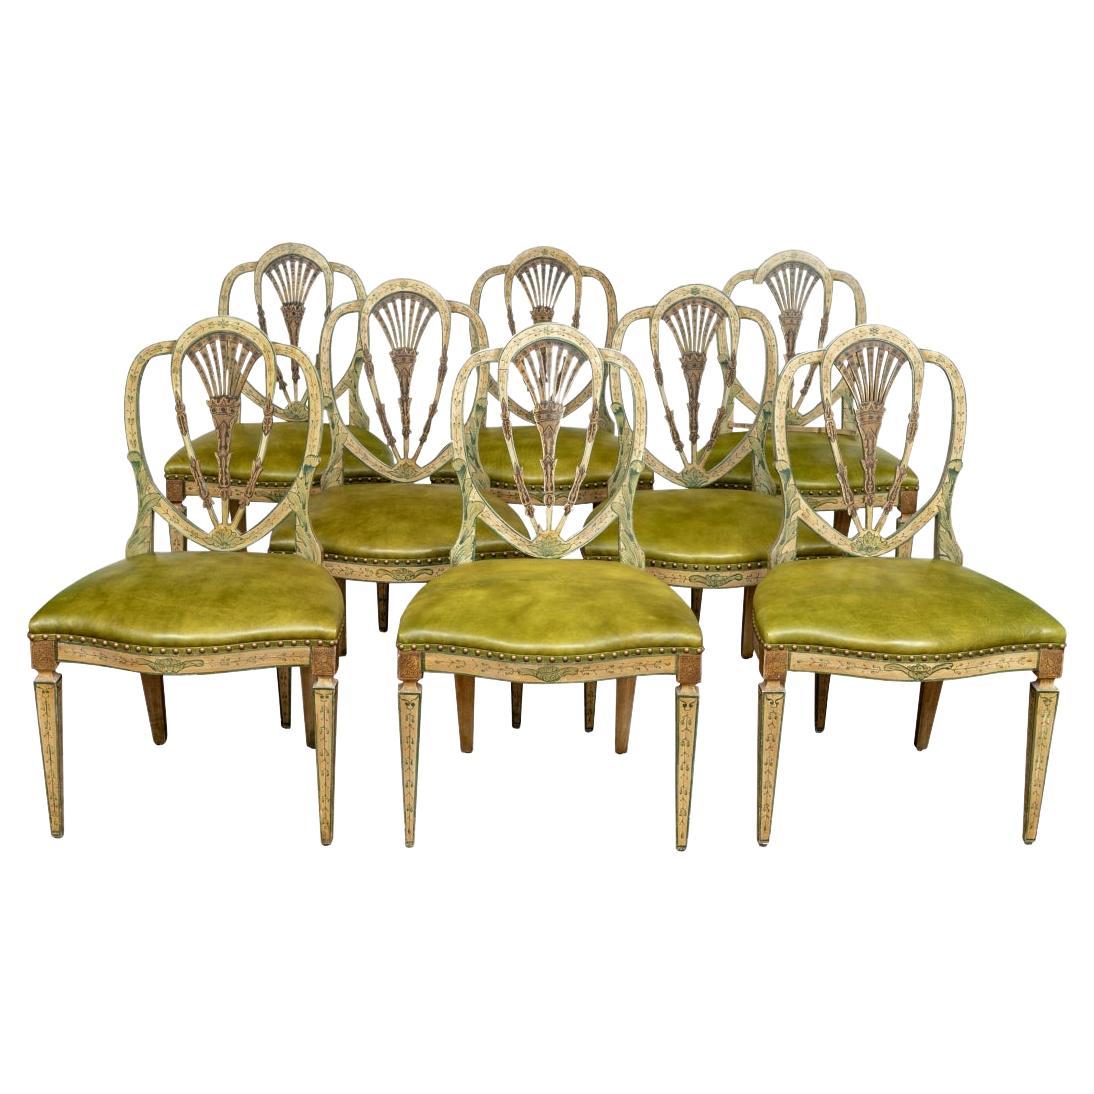 Extraordinary Set of 8 George III Style Painted Shield Back Side Chairs For Sale